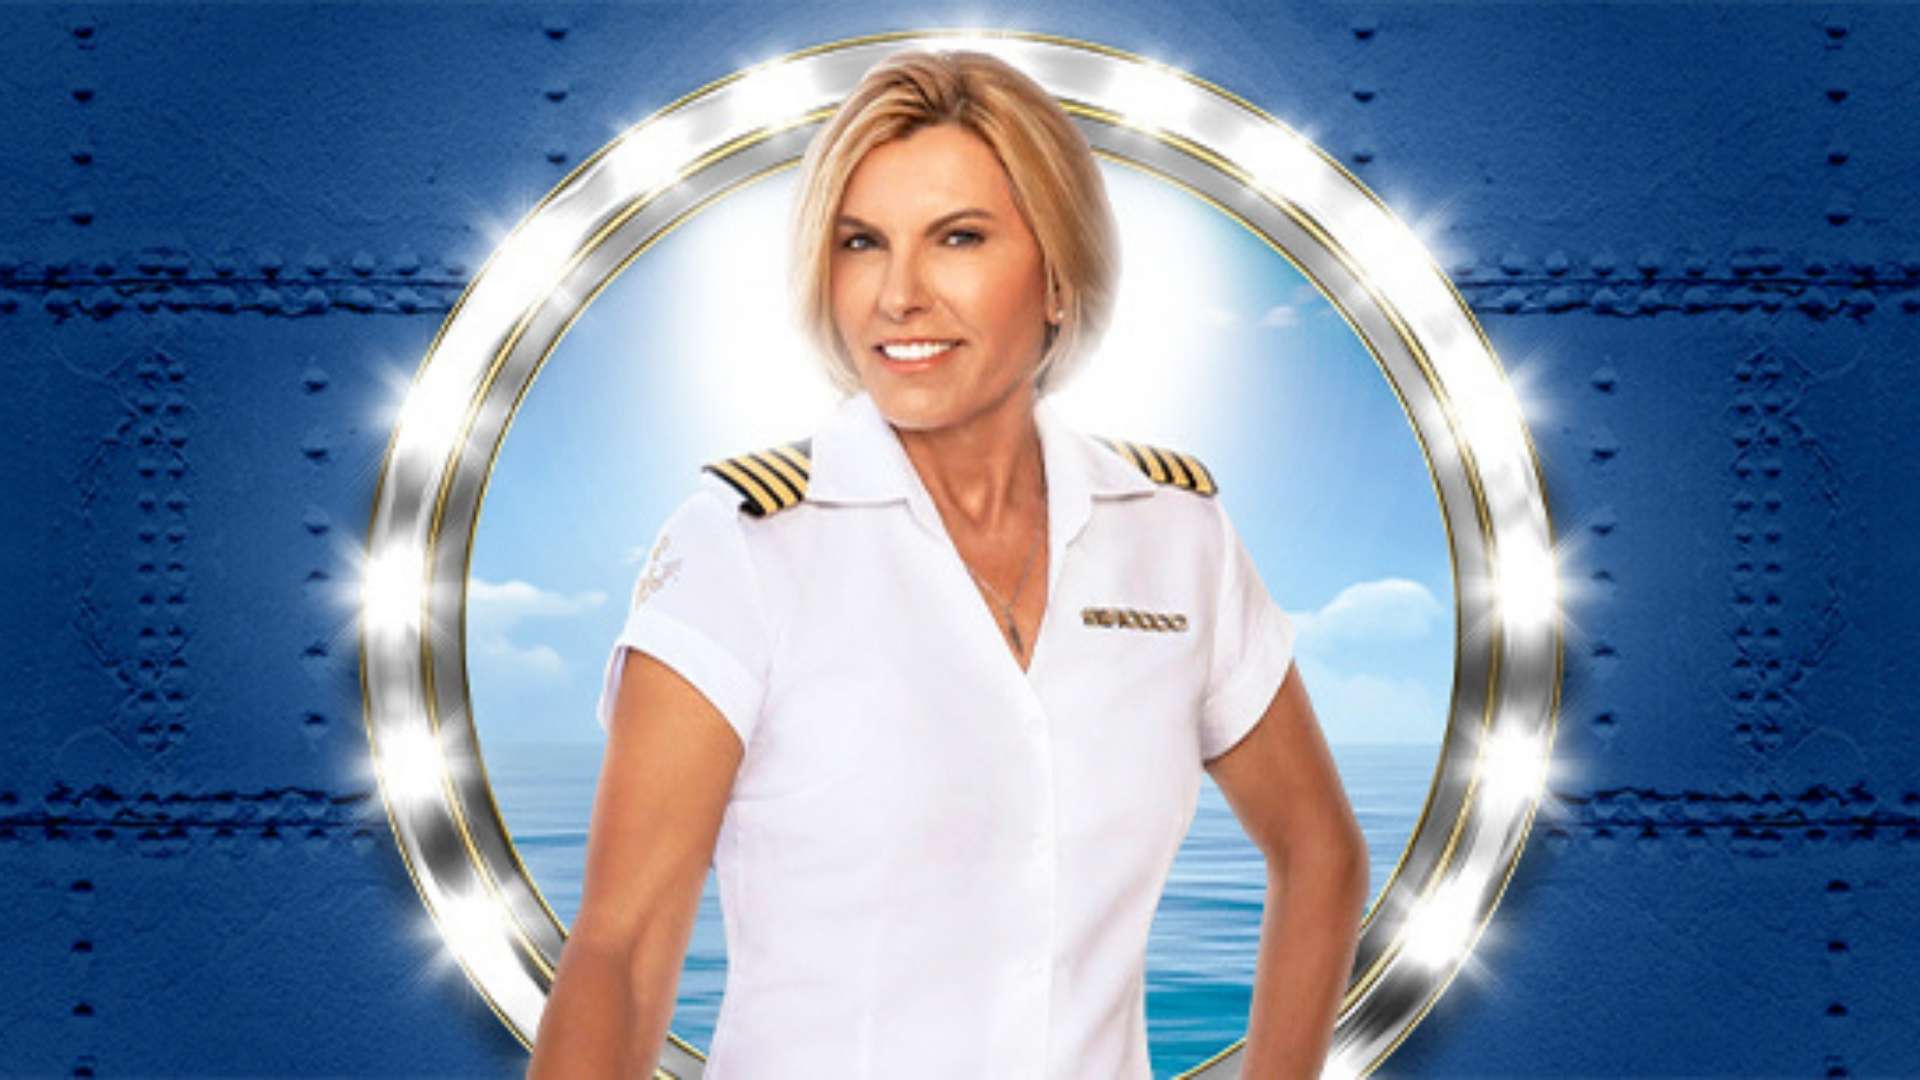 Below Deck Star Comes To West End S Lyric Theatre In Captain Sandy Live Theatre Weekly